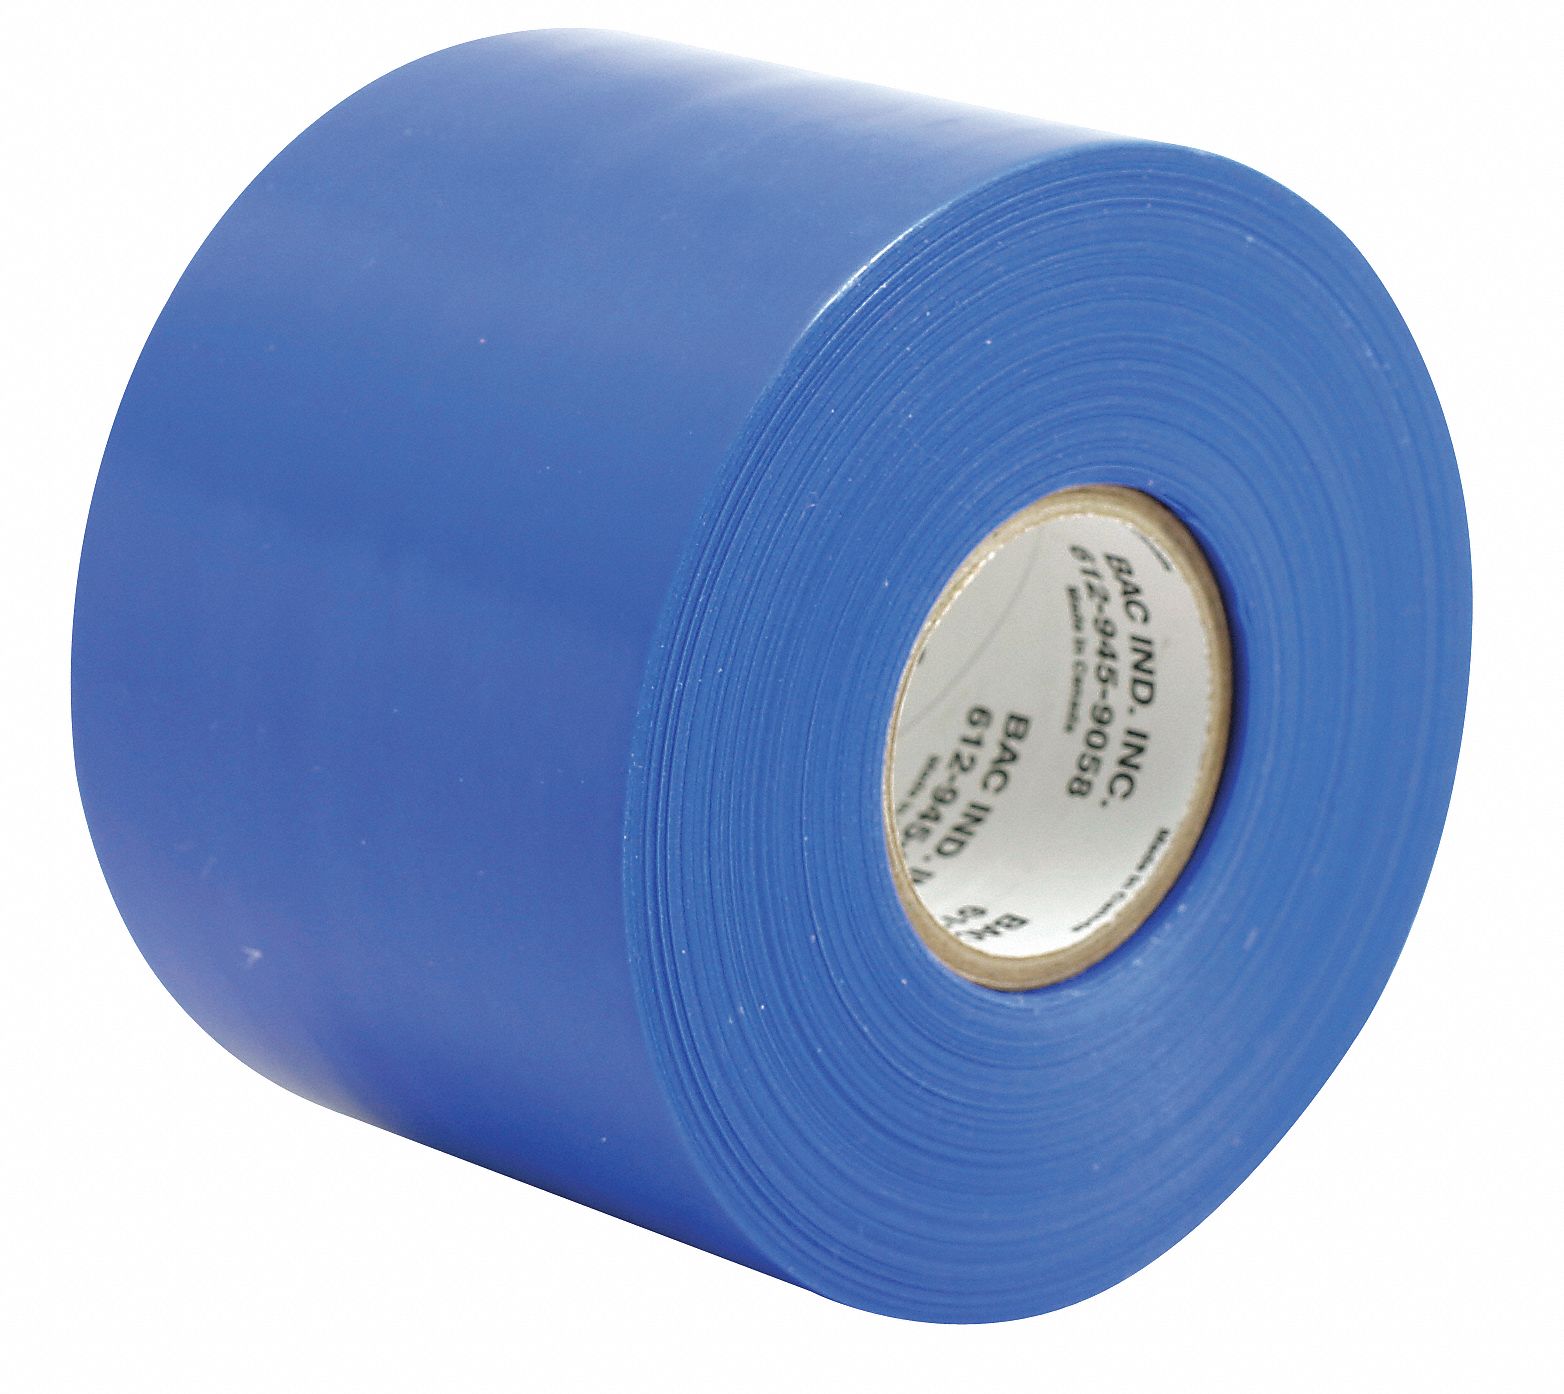 Duct Tape: BAC Industries Inc., Series TB, Light Duty, 3 in x 36 yd, Blue, Continuous Roll